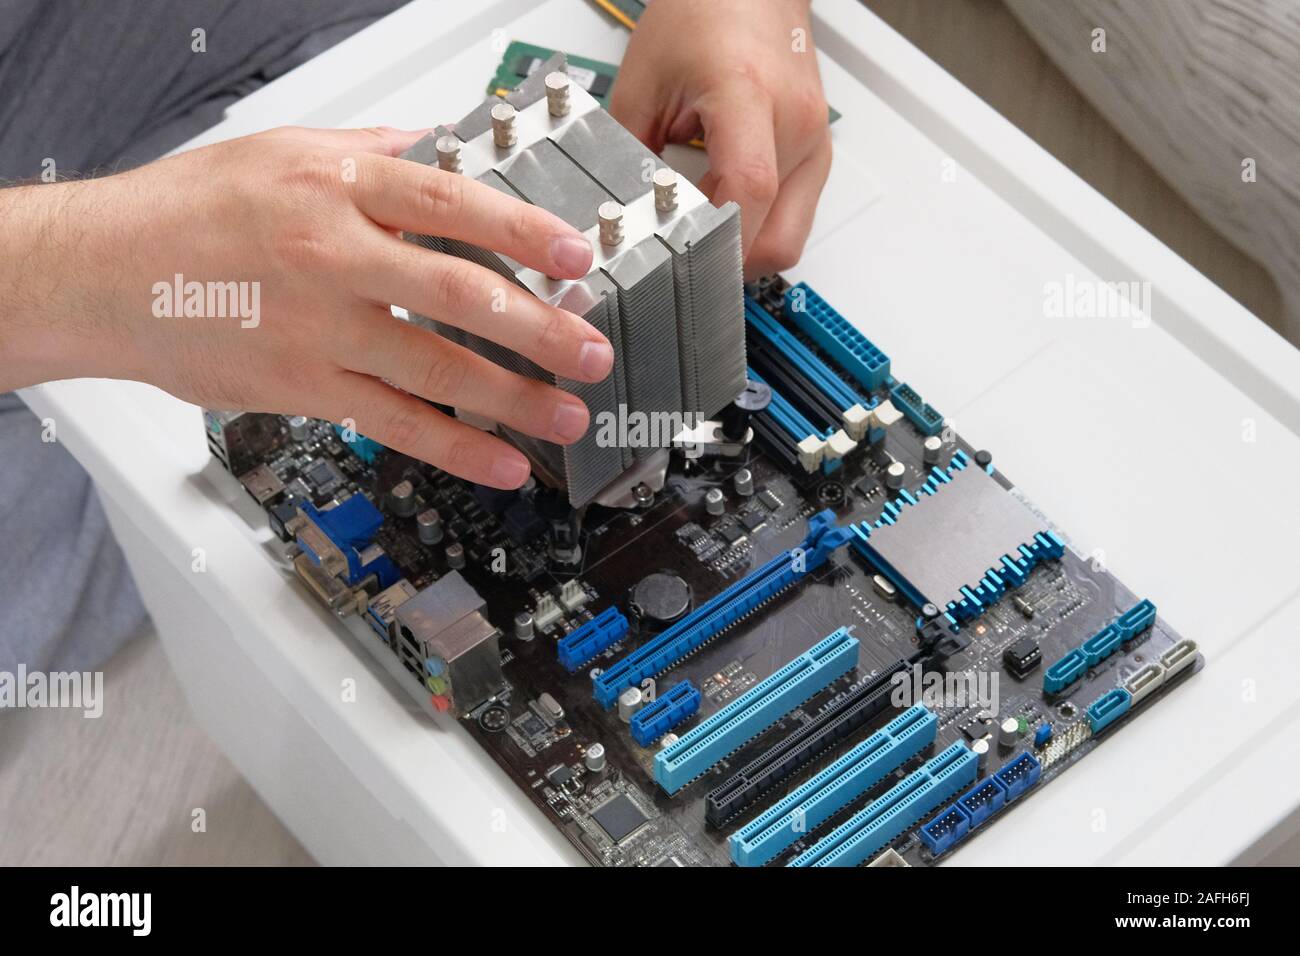 Hands of technician is repairing PC. Service electronics and computers concept. Stock Photo